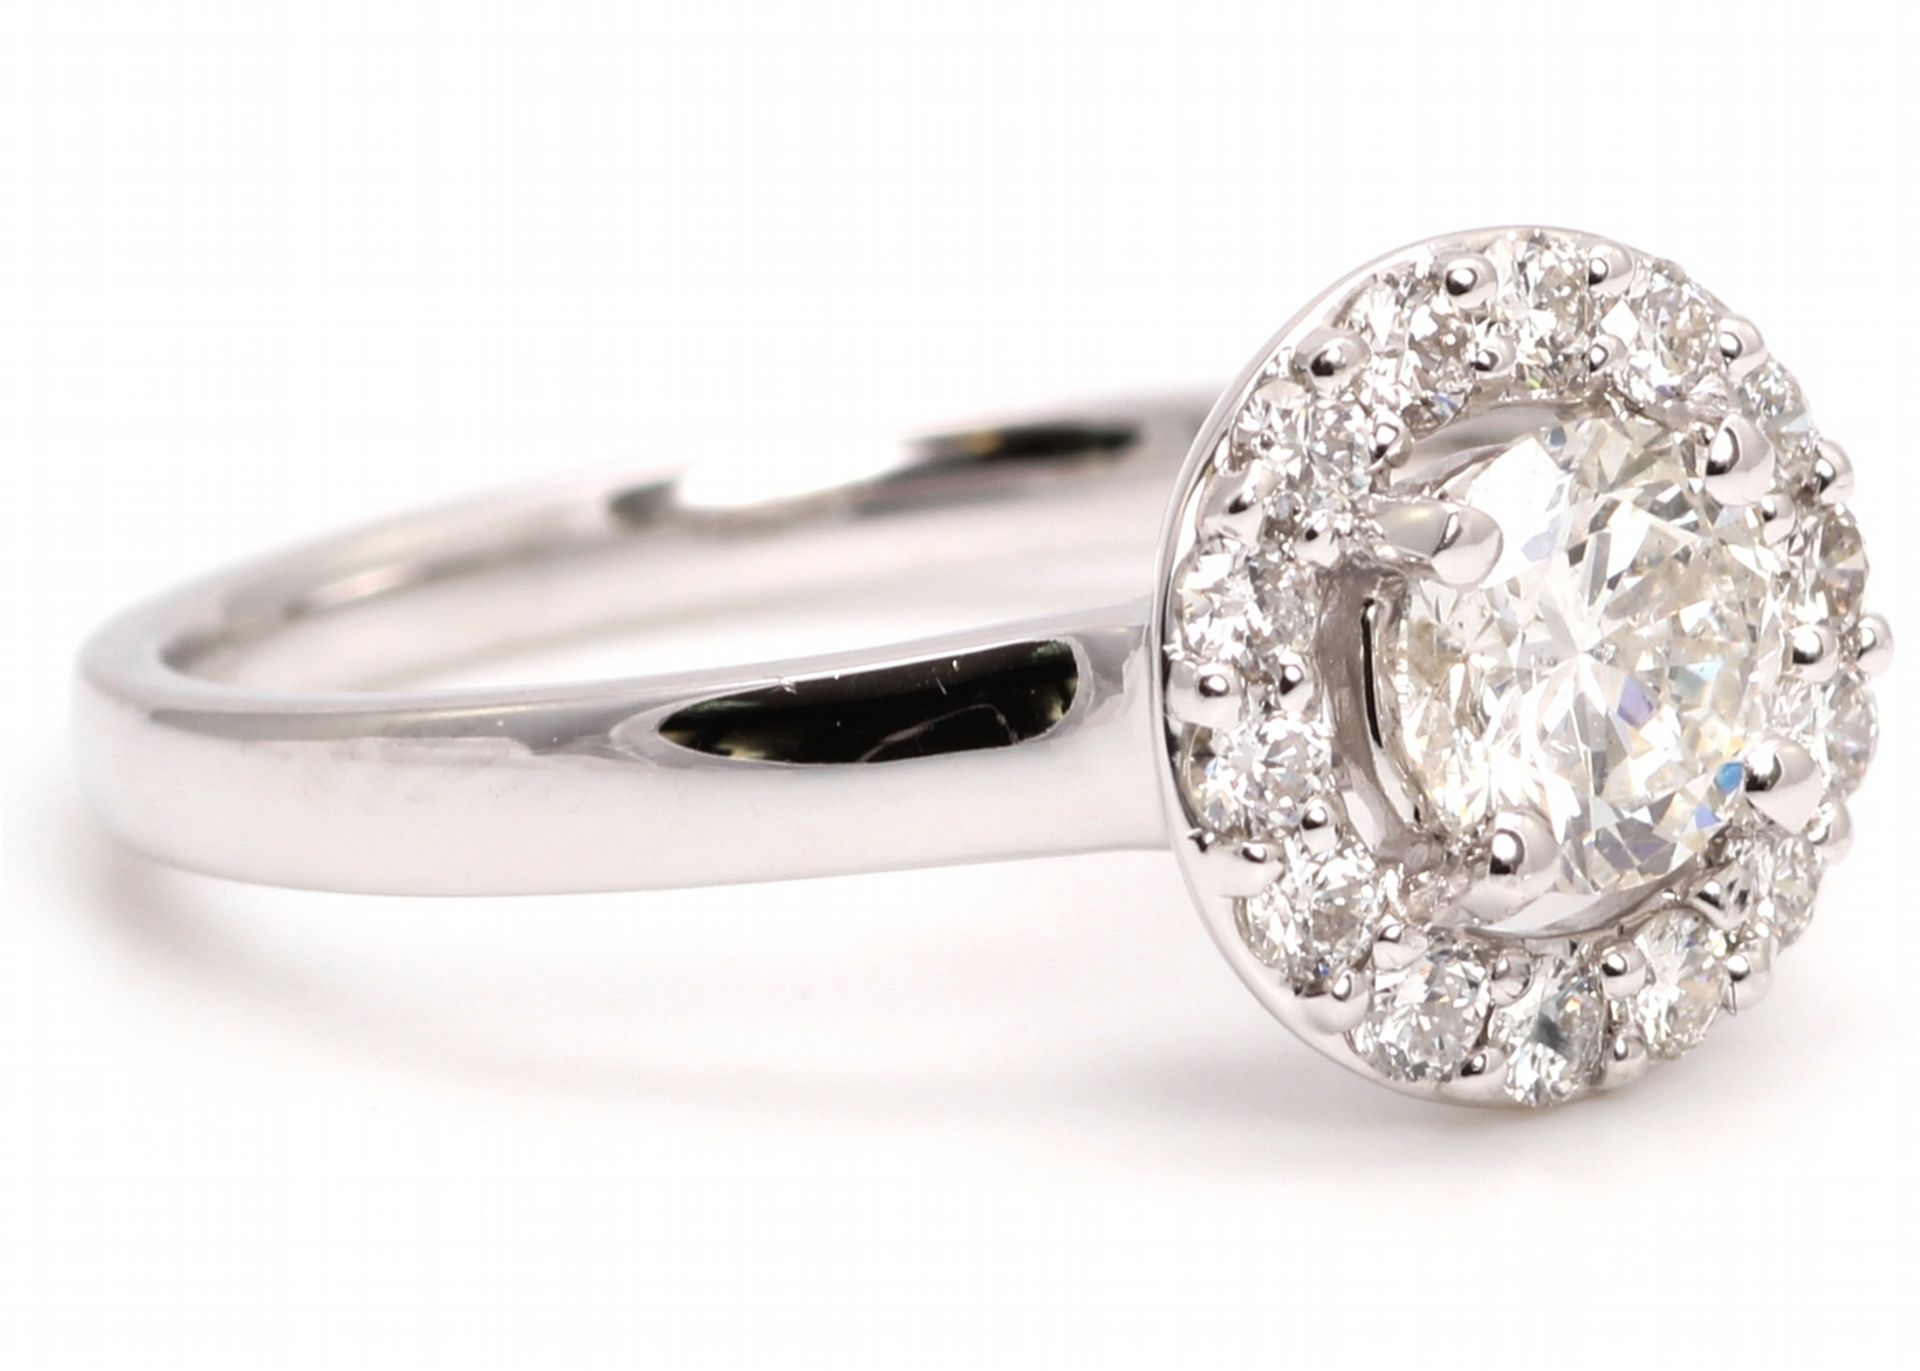 18ct White Gold Single Stone With Halo Setting Ring (0.58) 0.86 Carats - Valued by GIE £10,925. - Image 4 of 9